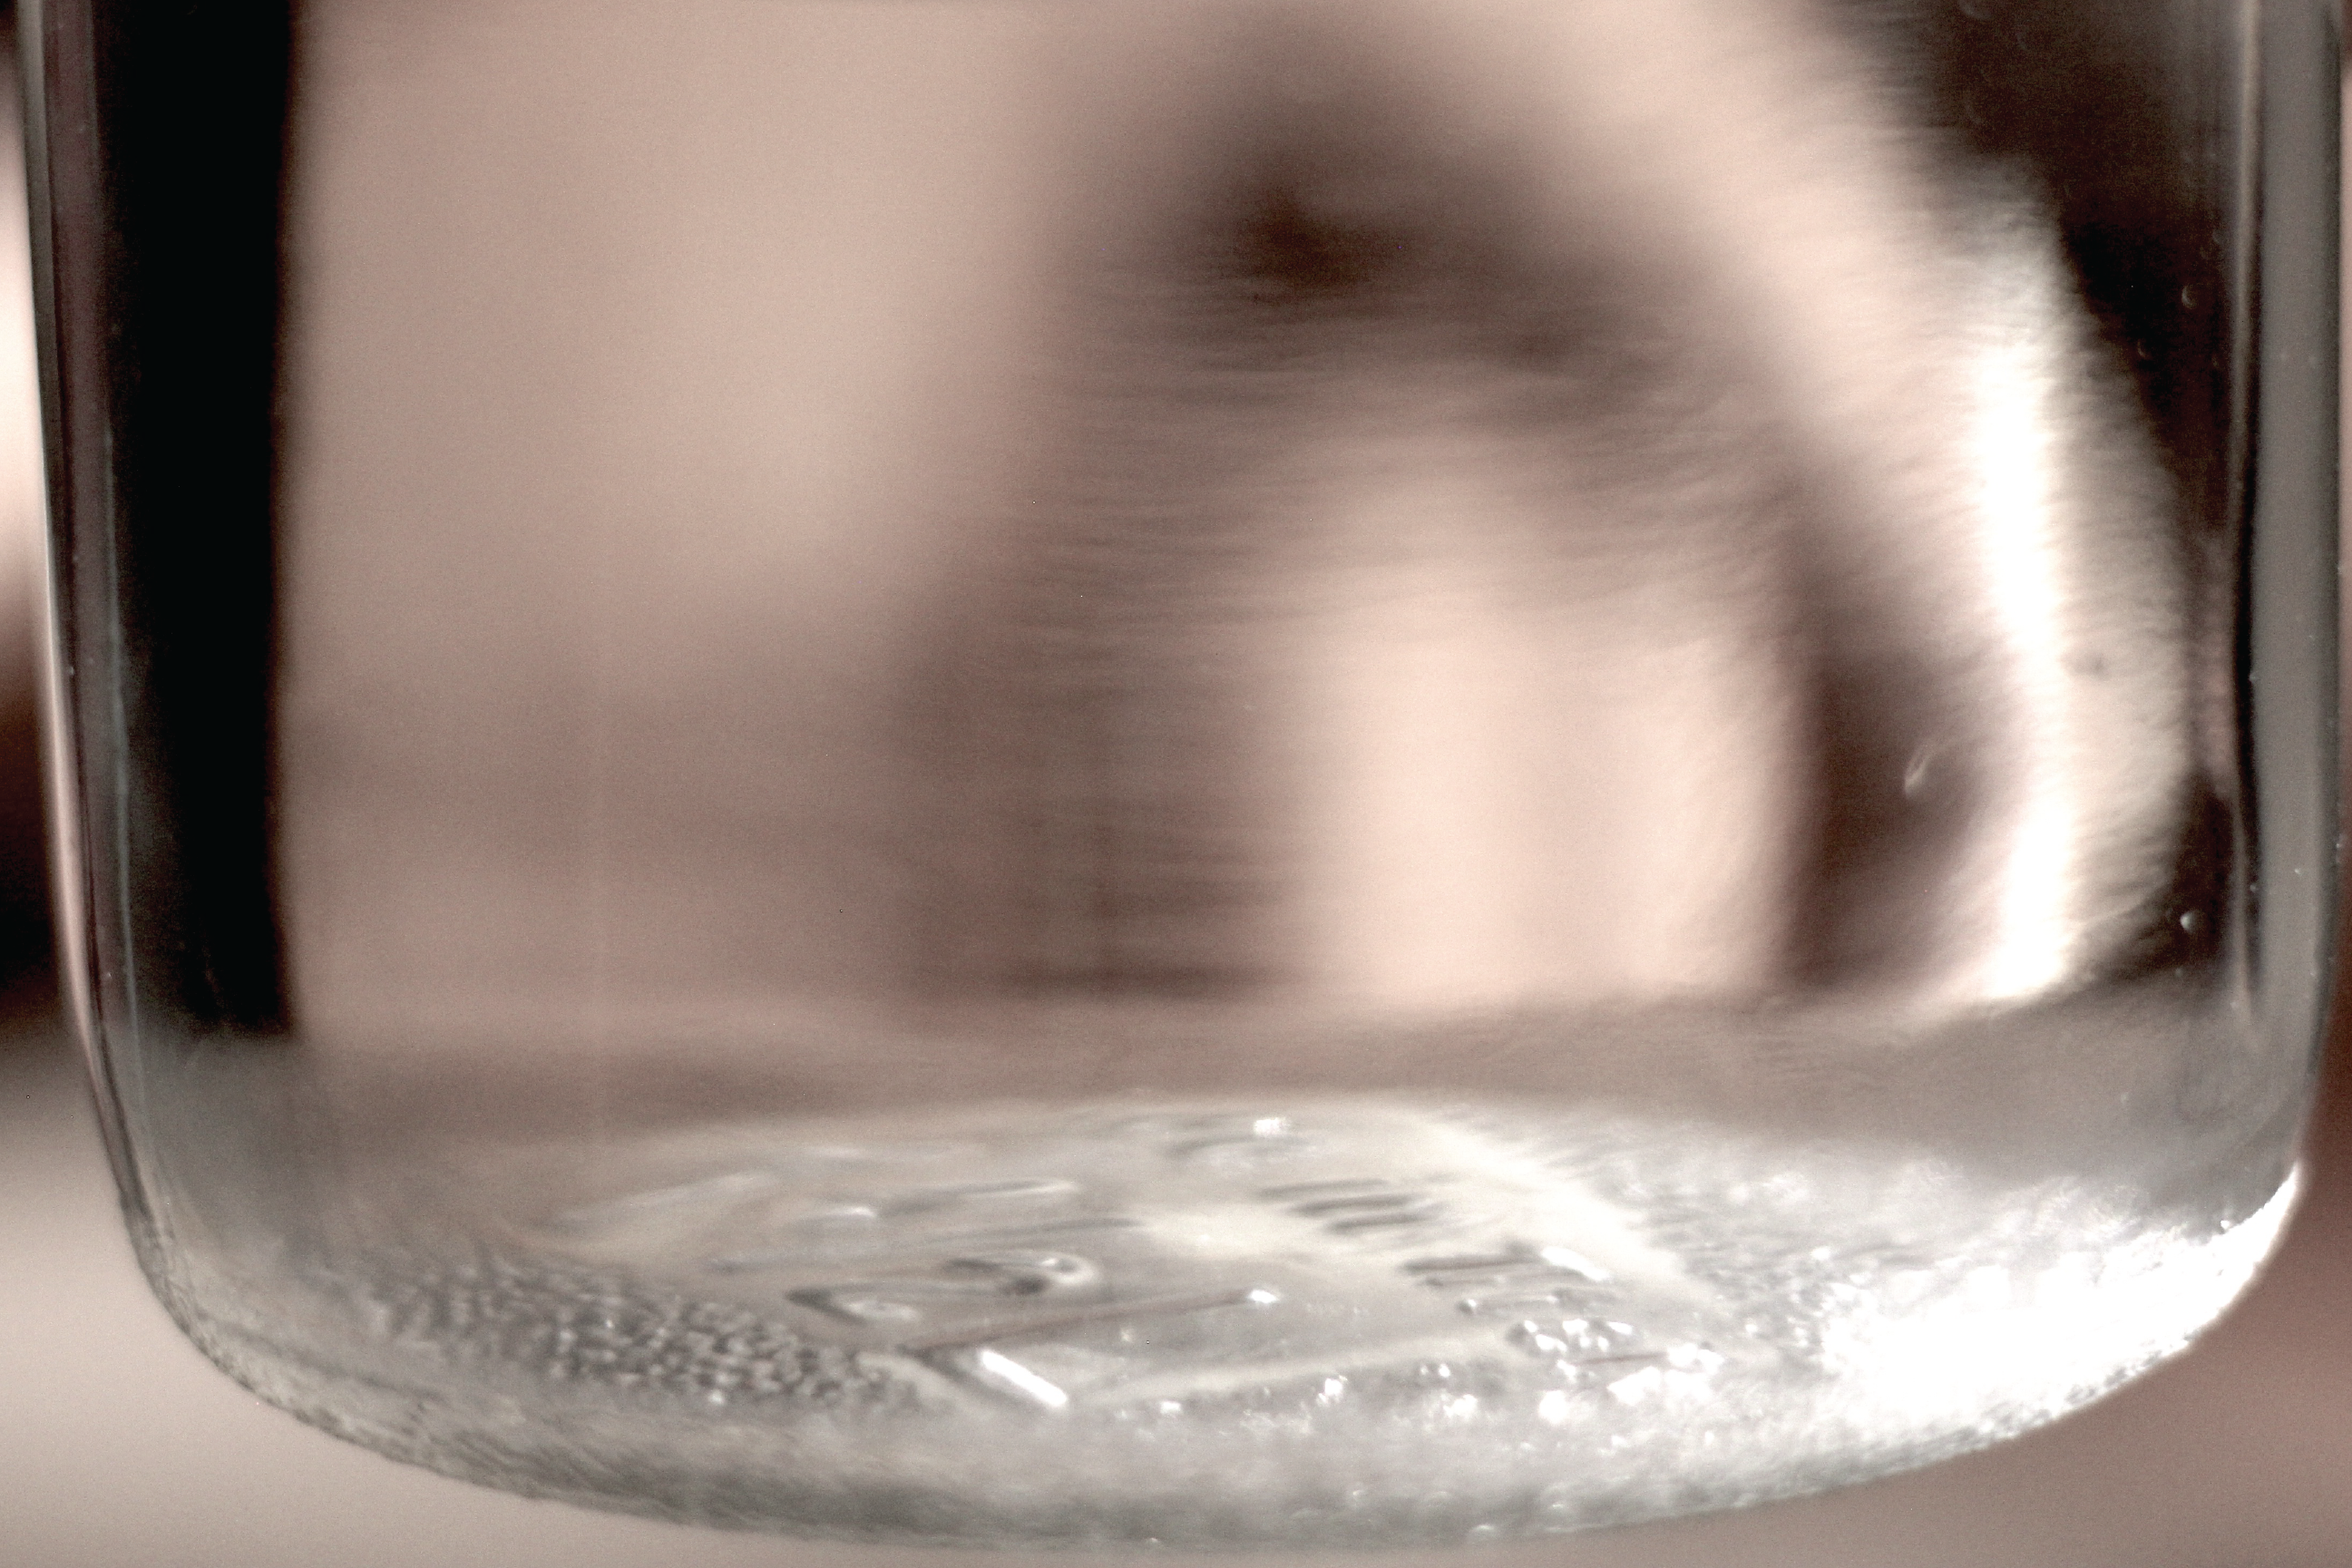 A close-up of a glass jar filled with clear liquid.